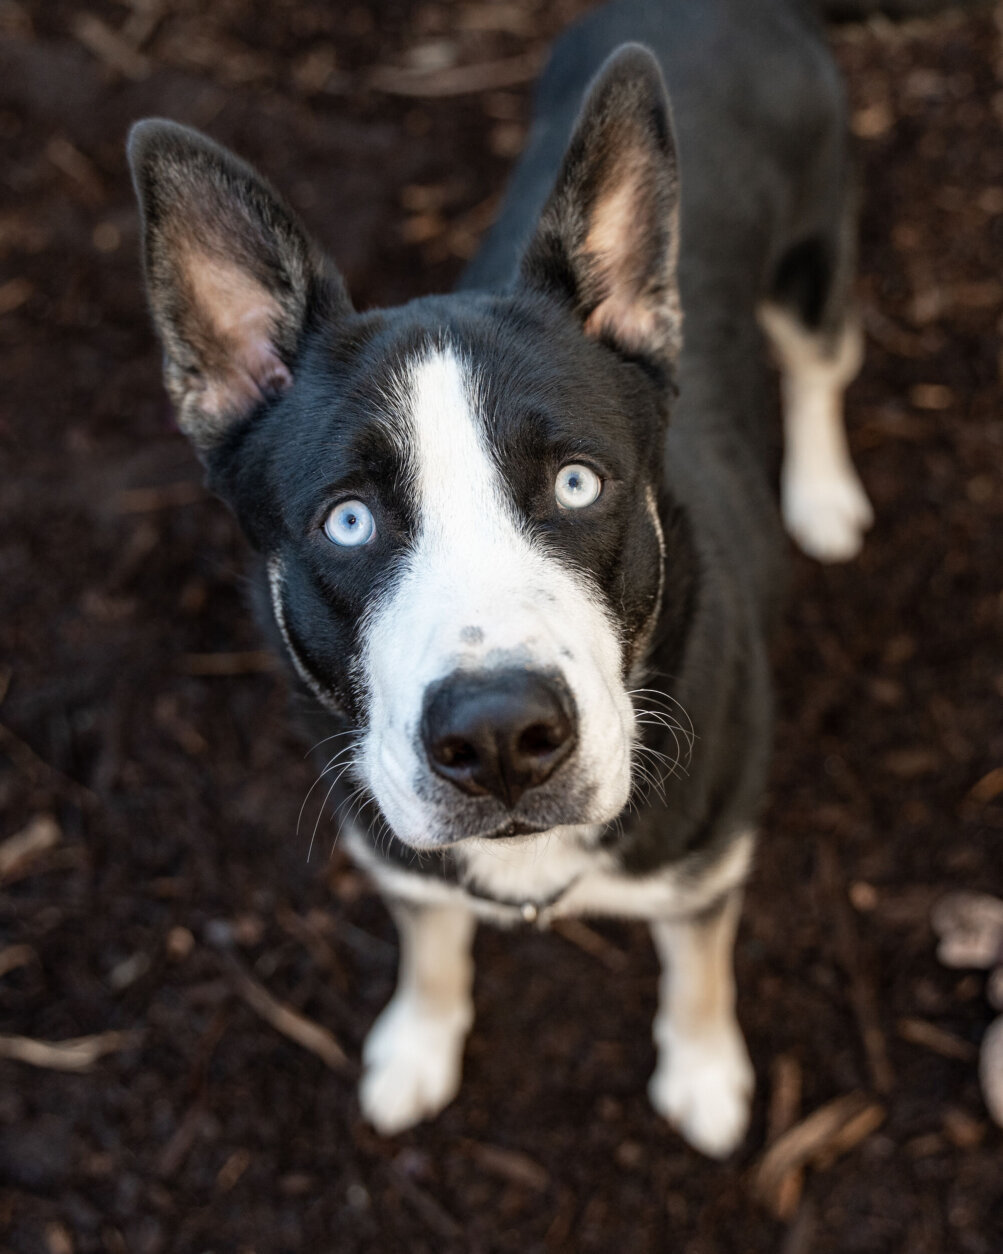 <p>It didn’t take long for <strong>Braden</strong> to get adopted. The former stray’s piercing blue eyes and gentle demeanor landed him a home soon after he arrived at the Humane Rescue Alliance.</p>
